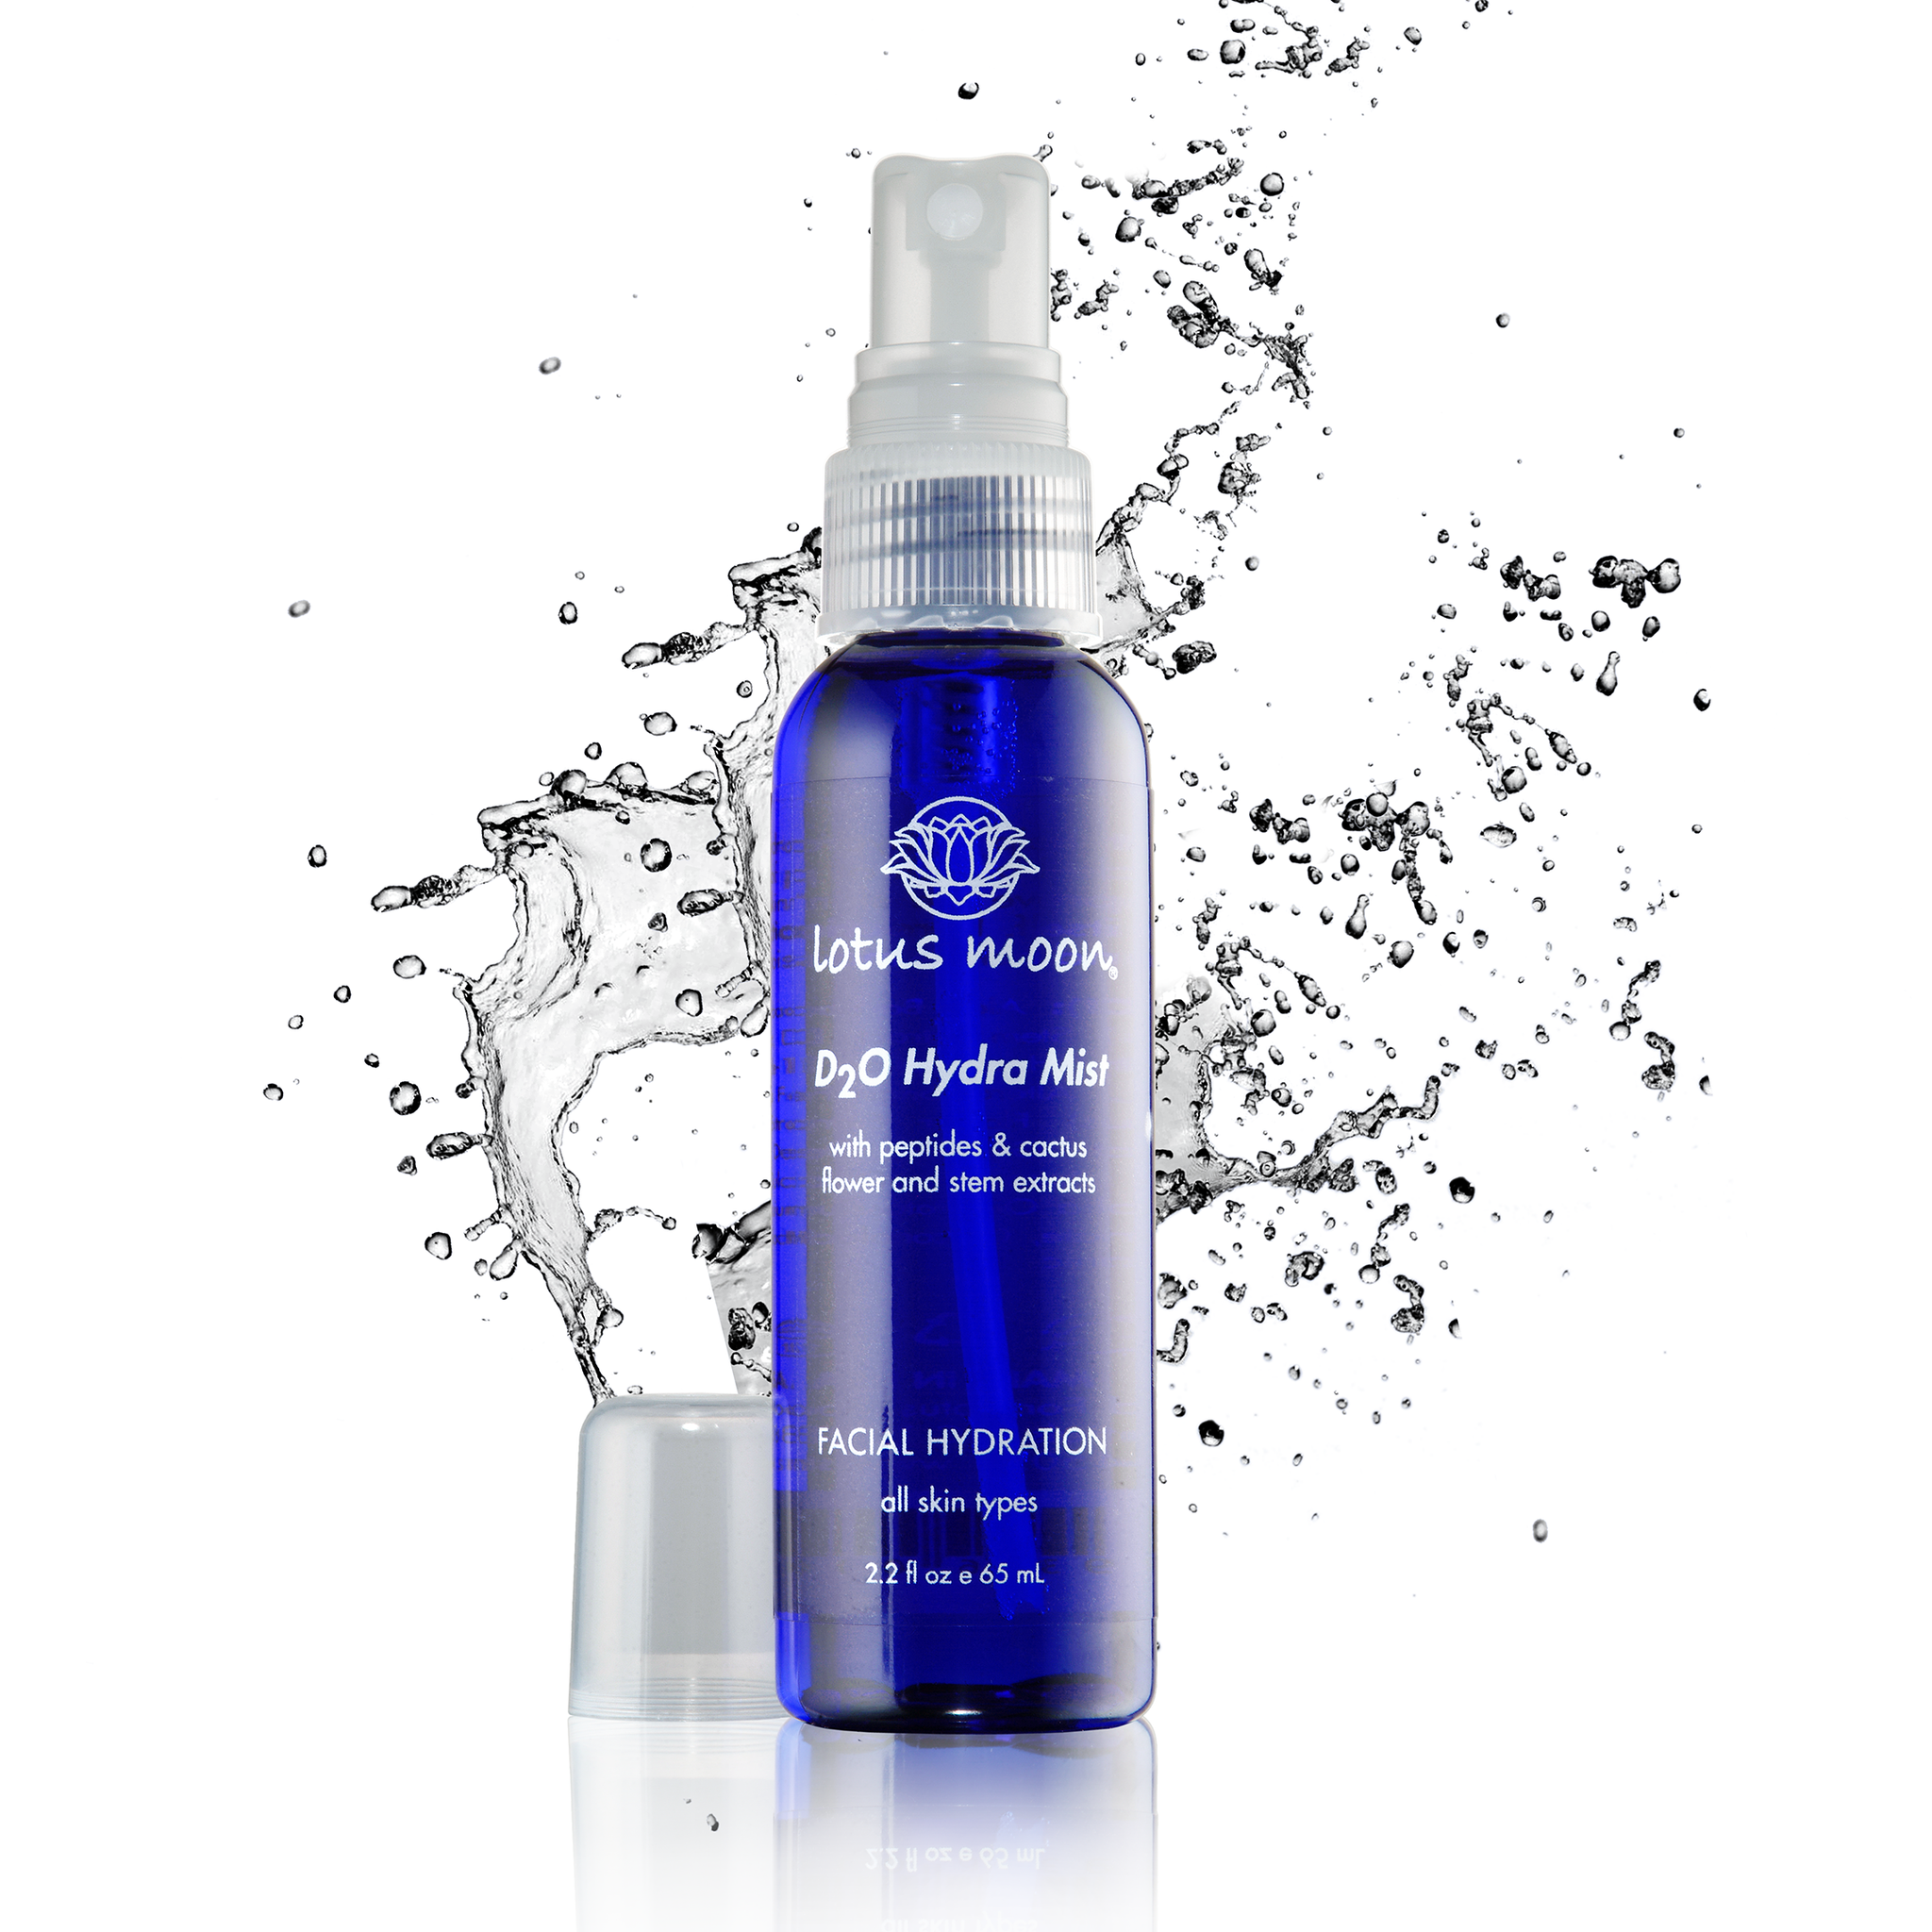 revitalize a dry and dehydrated complexion throughout the day with Lotus Moon's Hydrating Mist. D20 Heavy Water